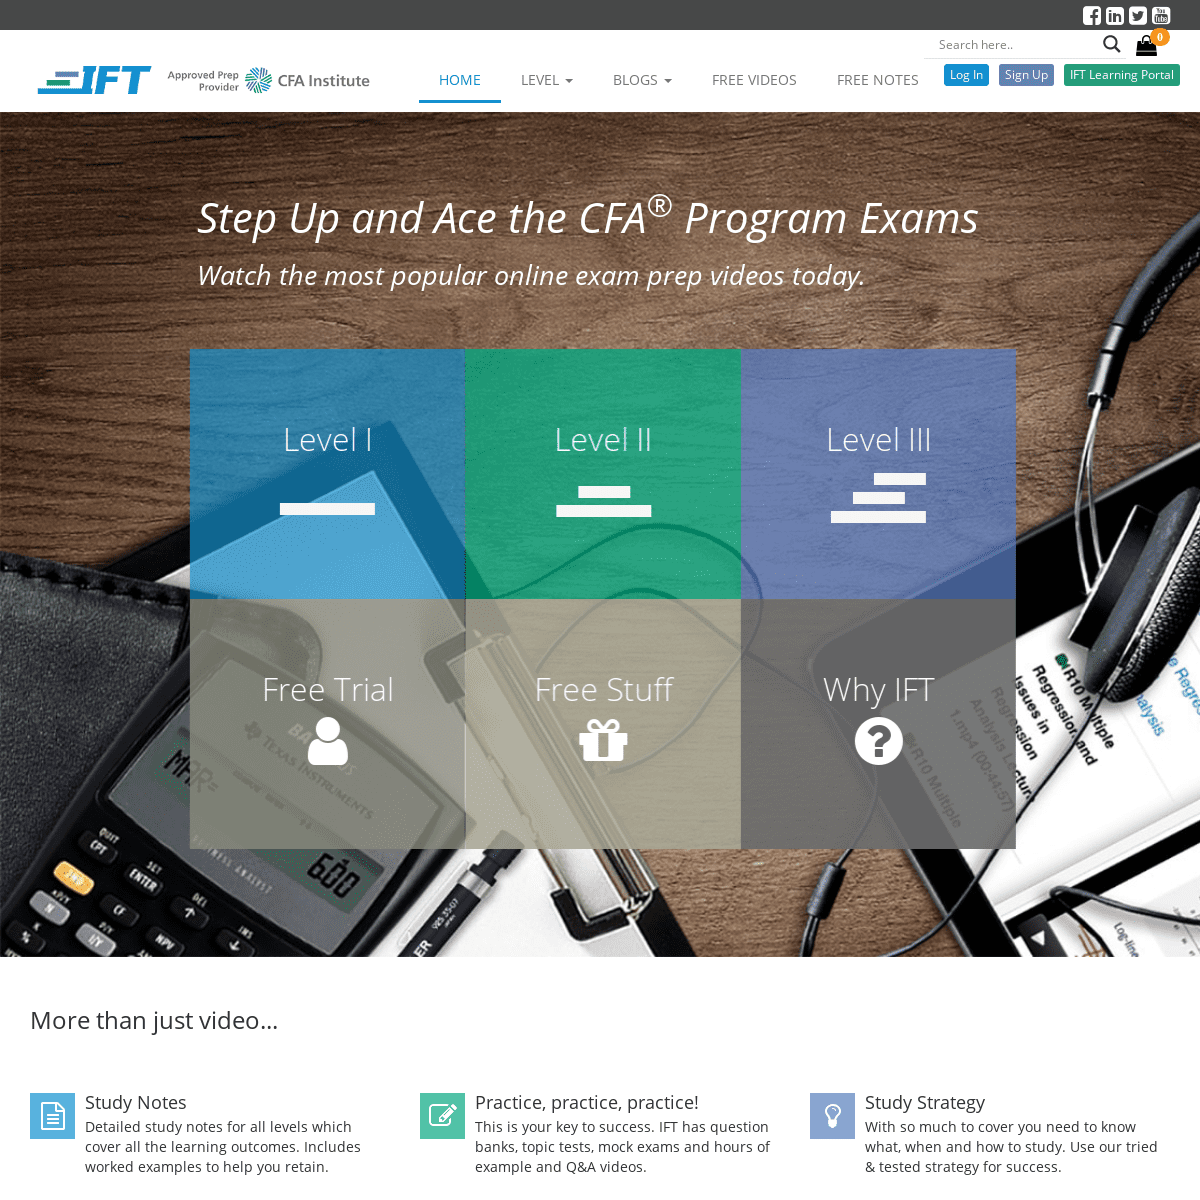 IFT World - Welcome to the IFT Learning Portal